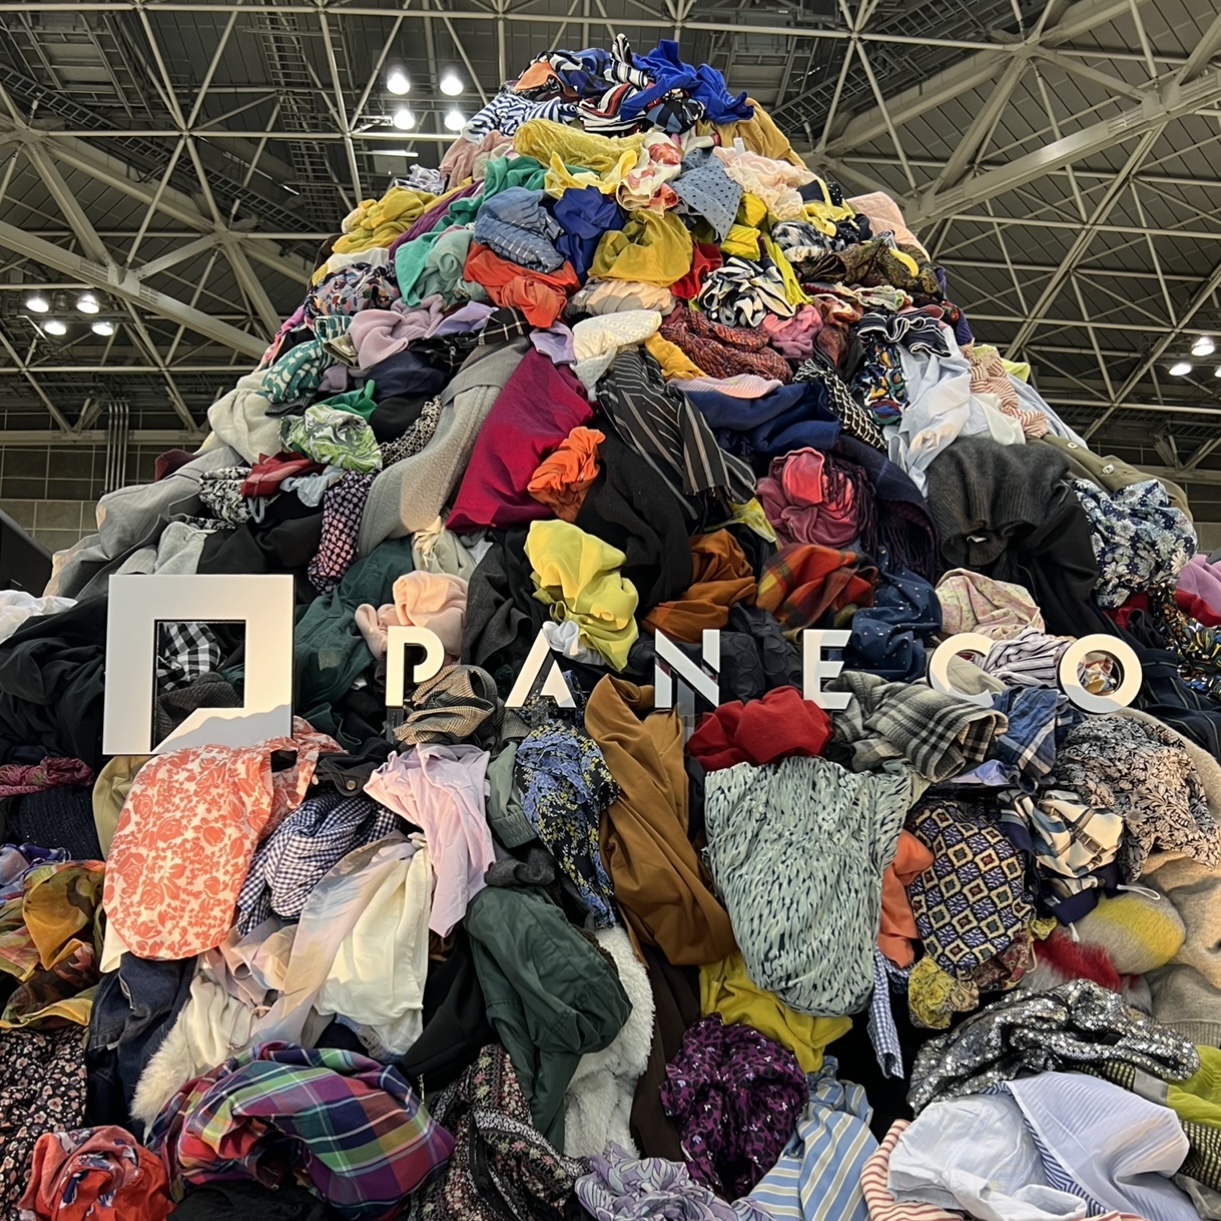 PANECO | Clothing-Clothes and Textile Recycling